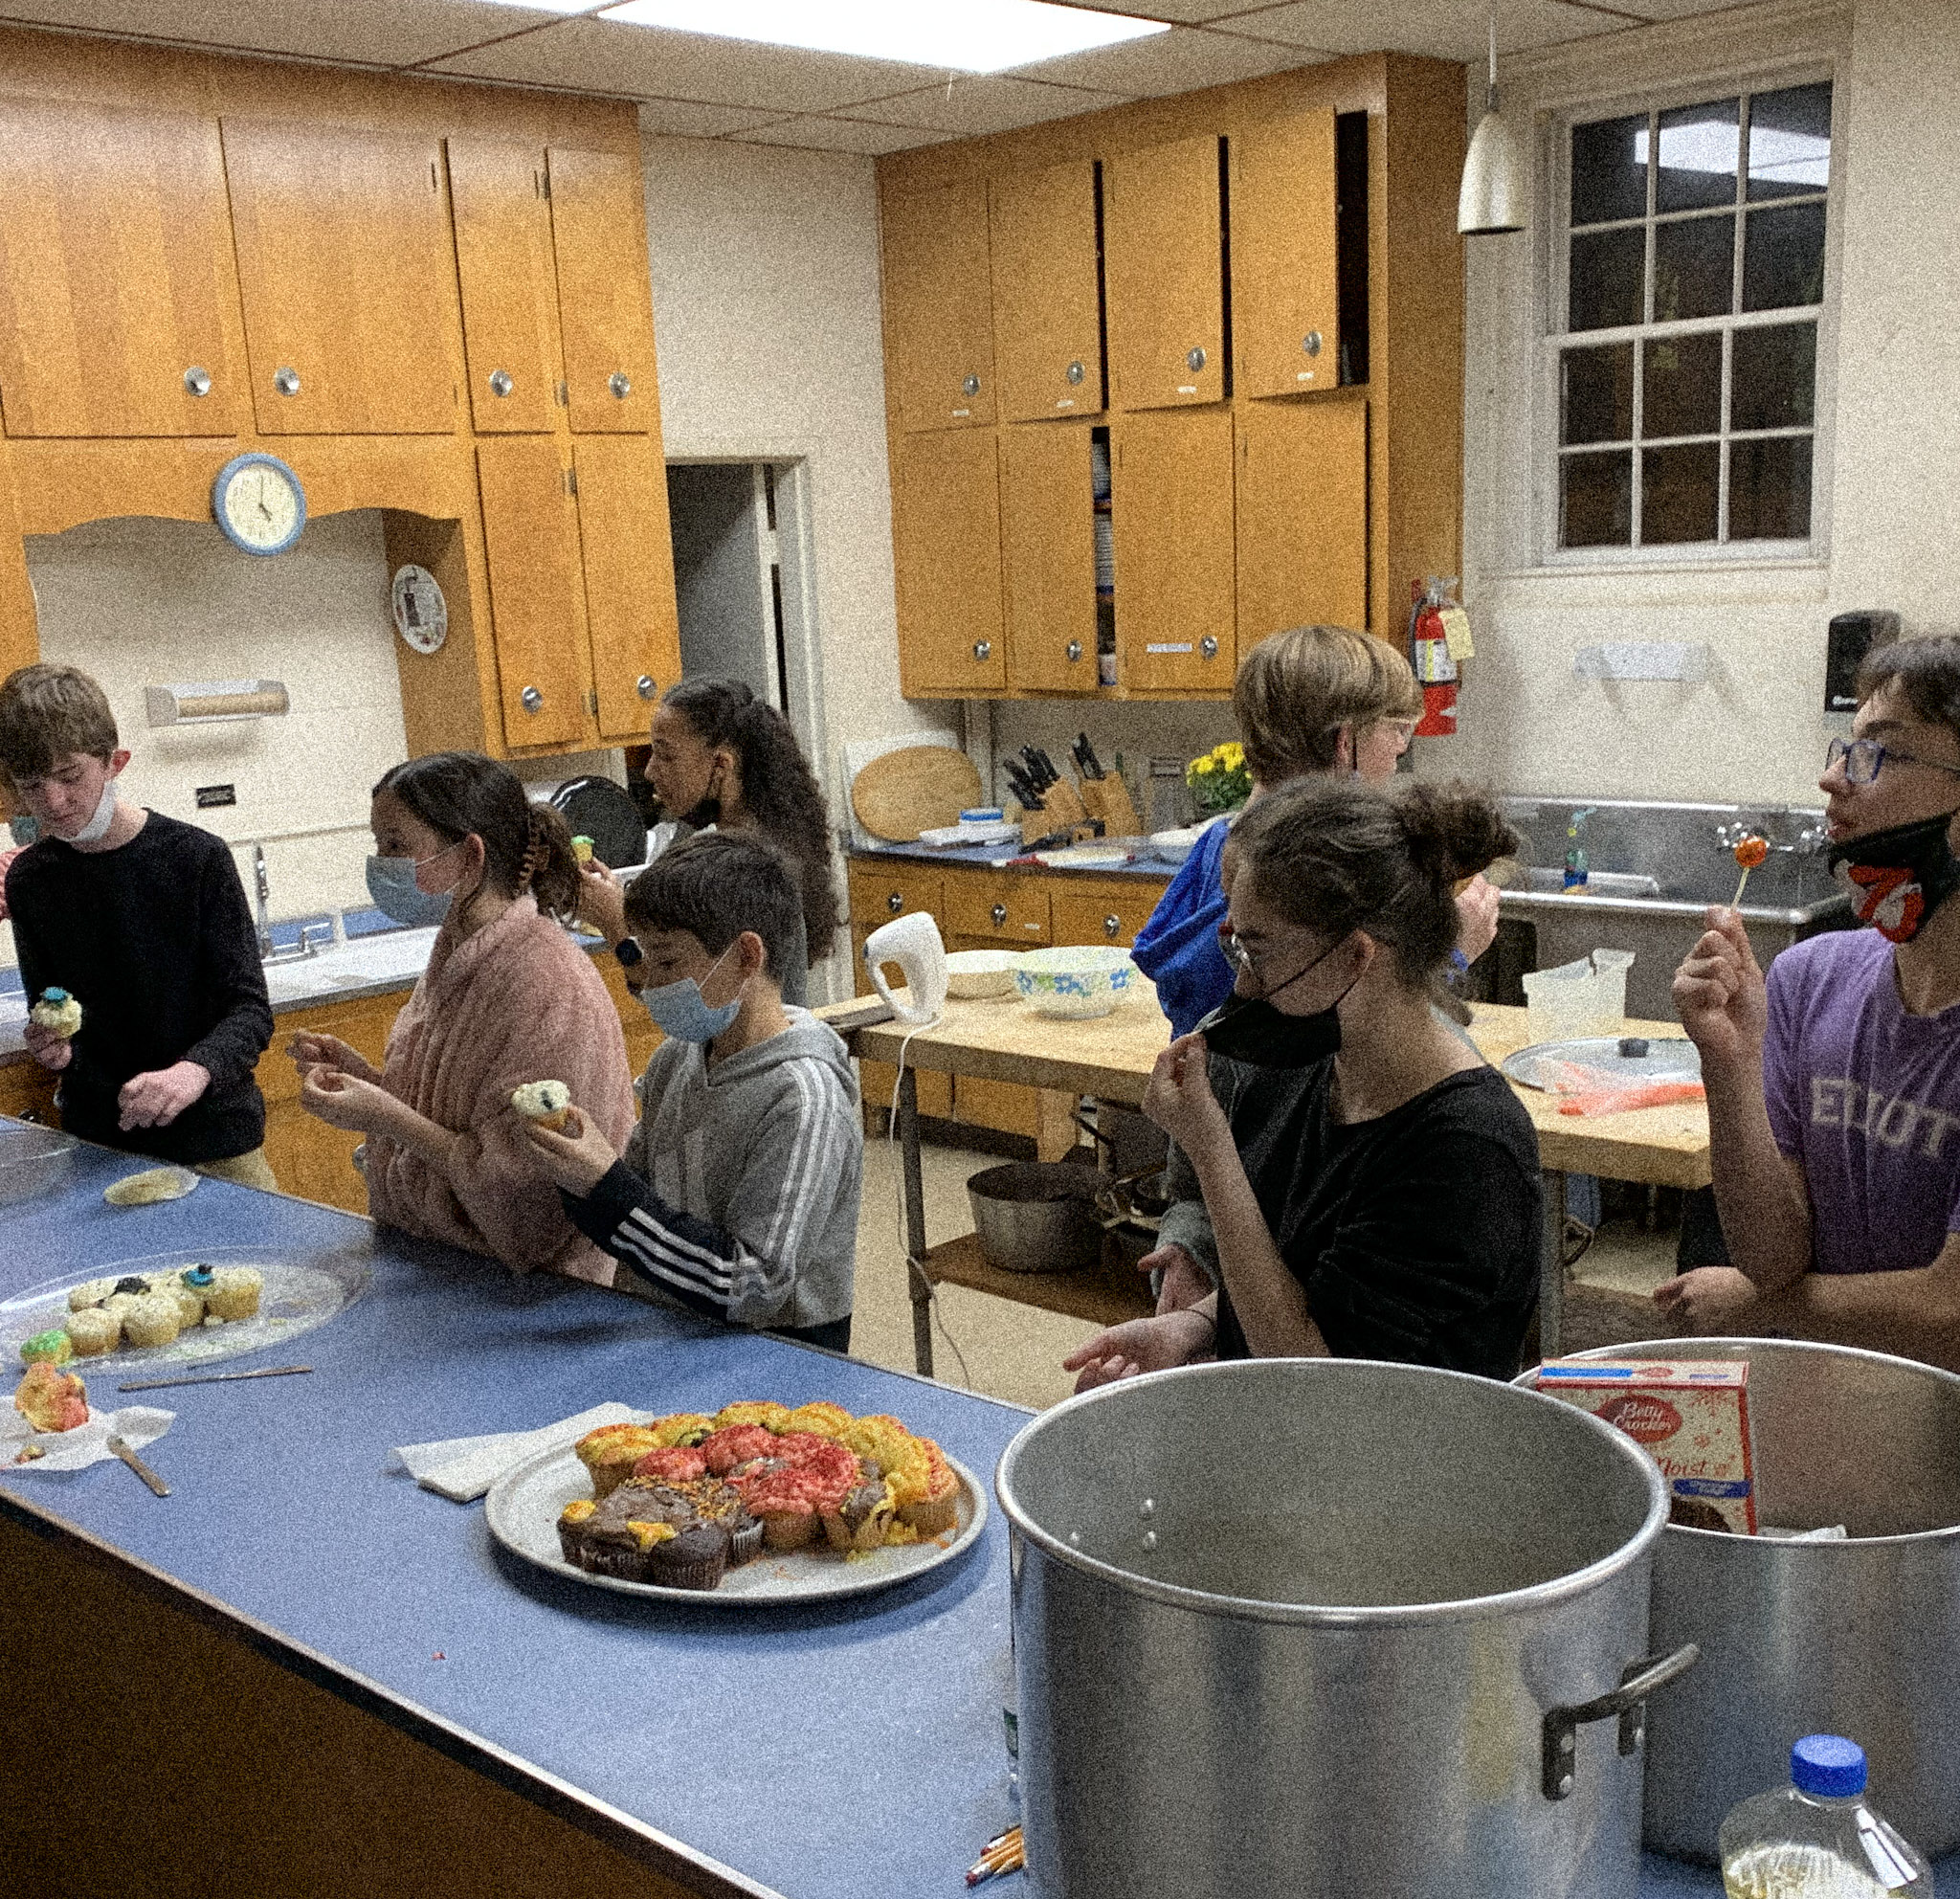 Youth group kids at a bakeoff competition